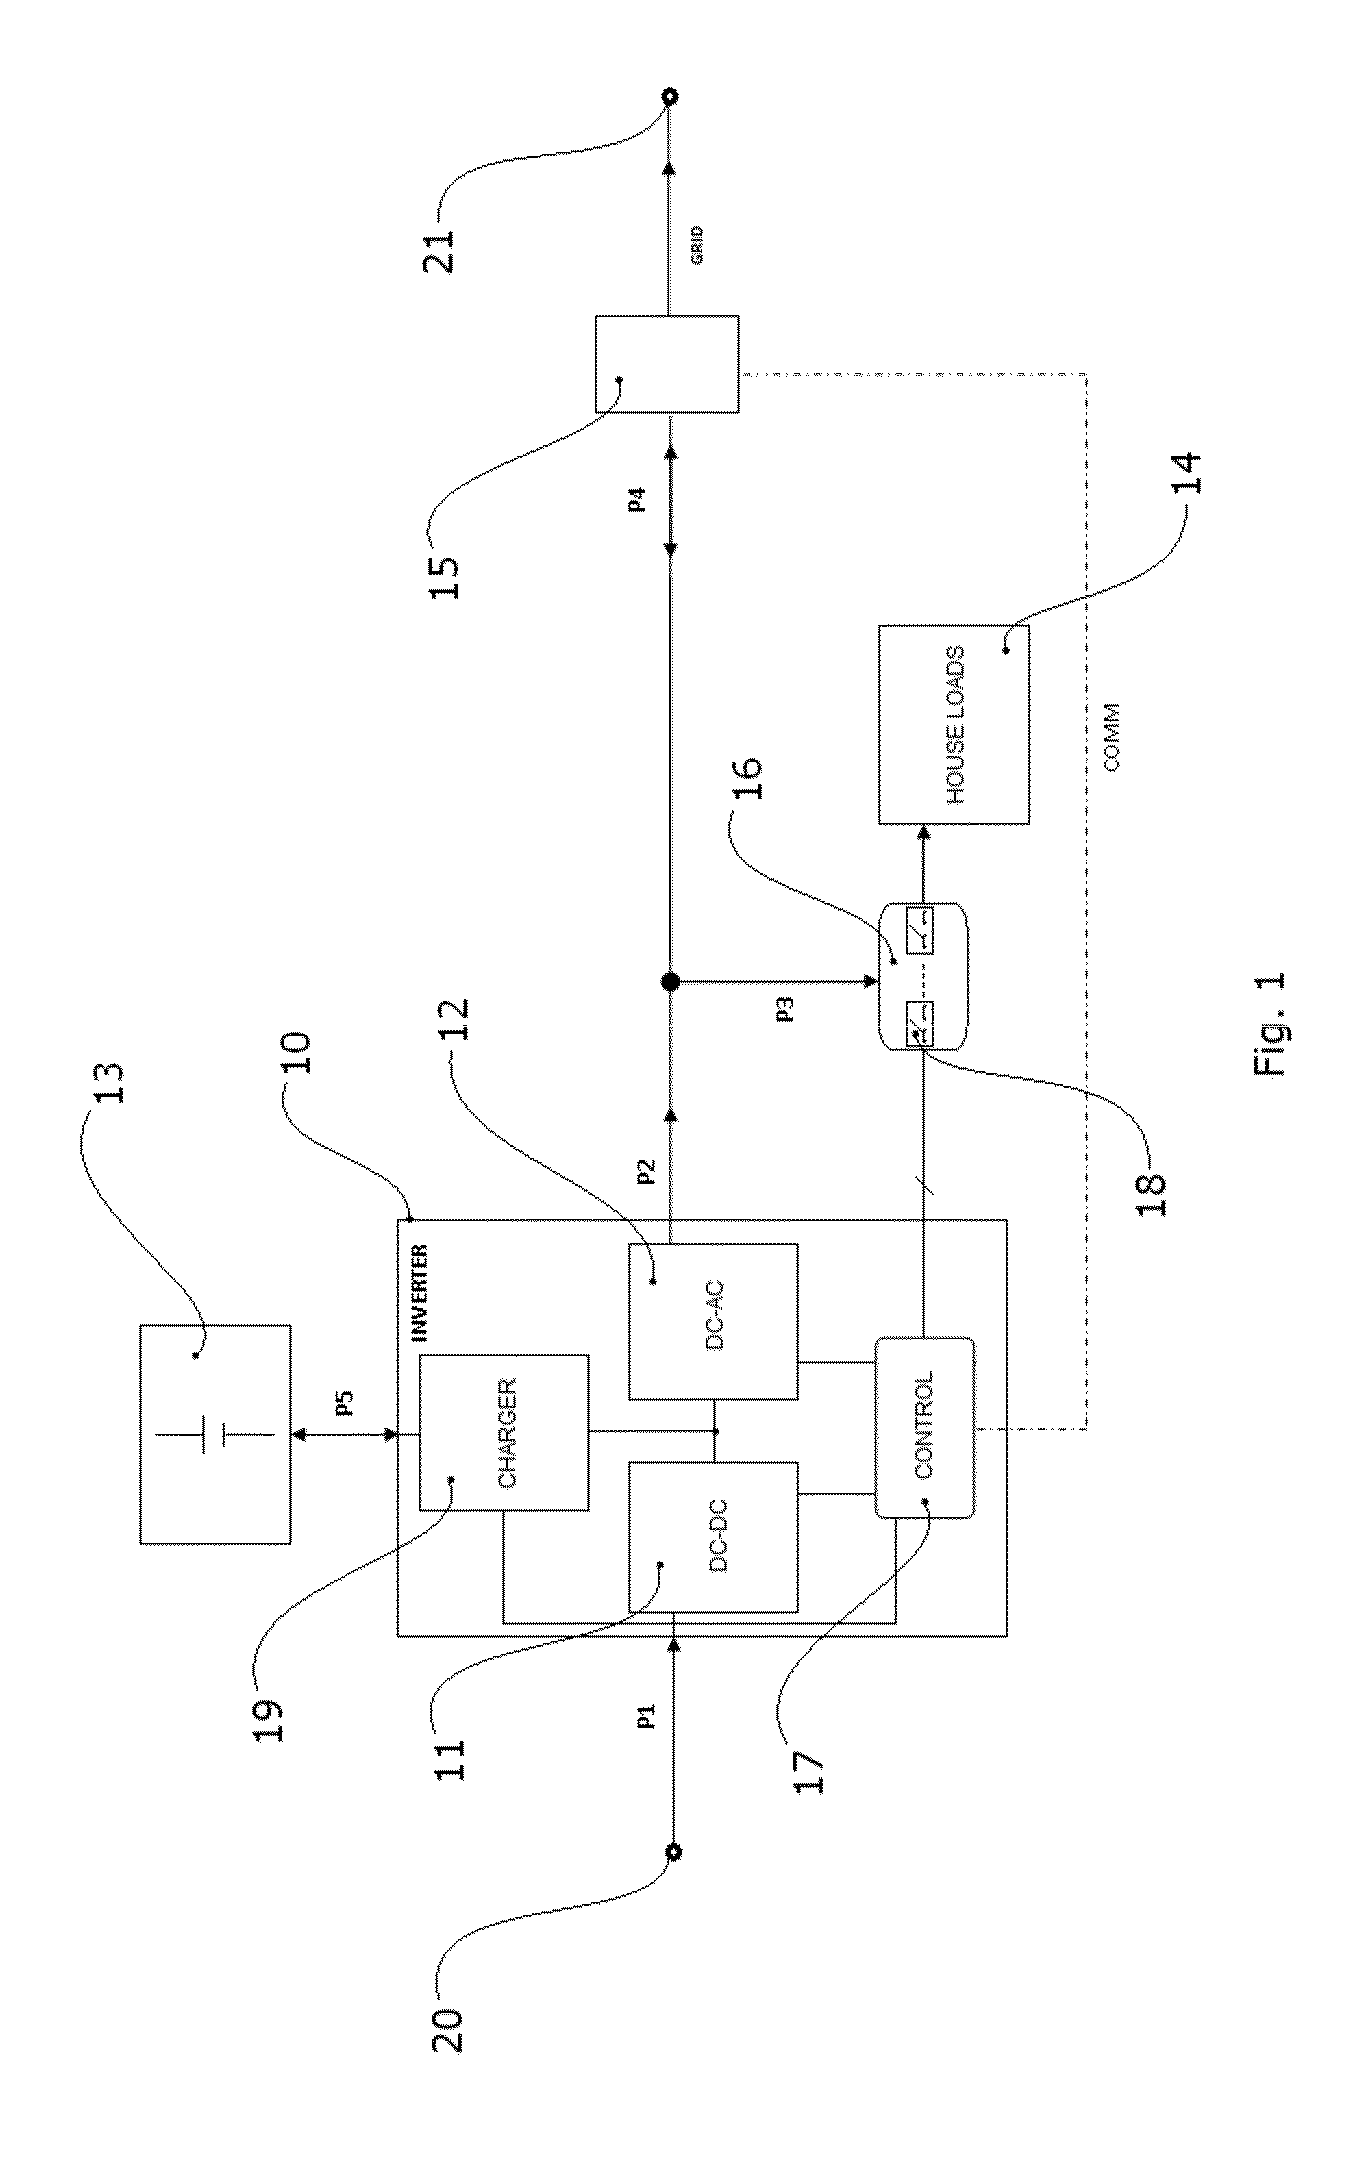 Apparatus for the conversion and optimized consumption management of power from renewable sources